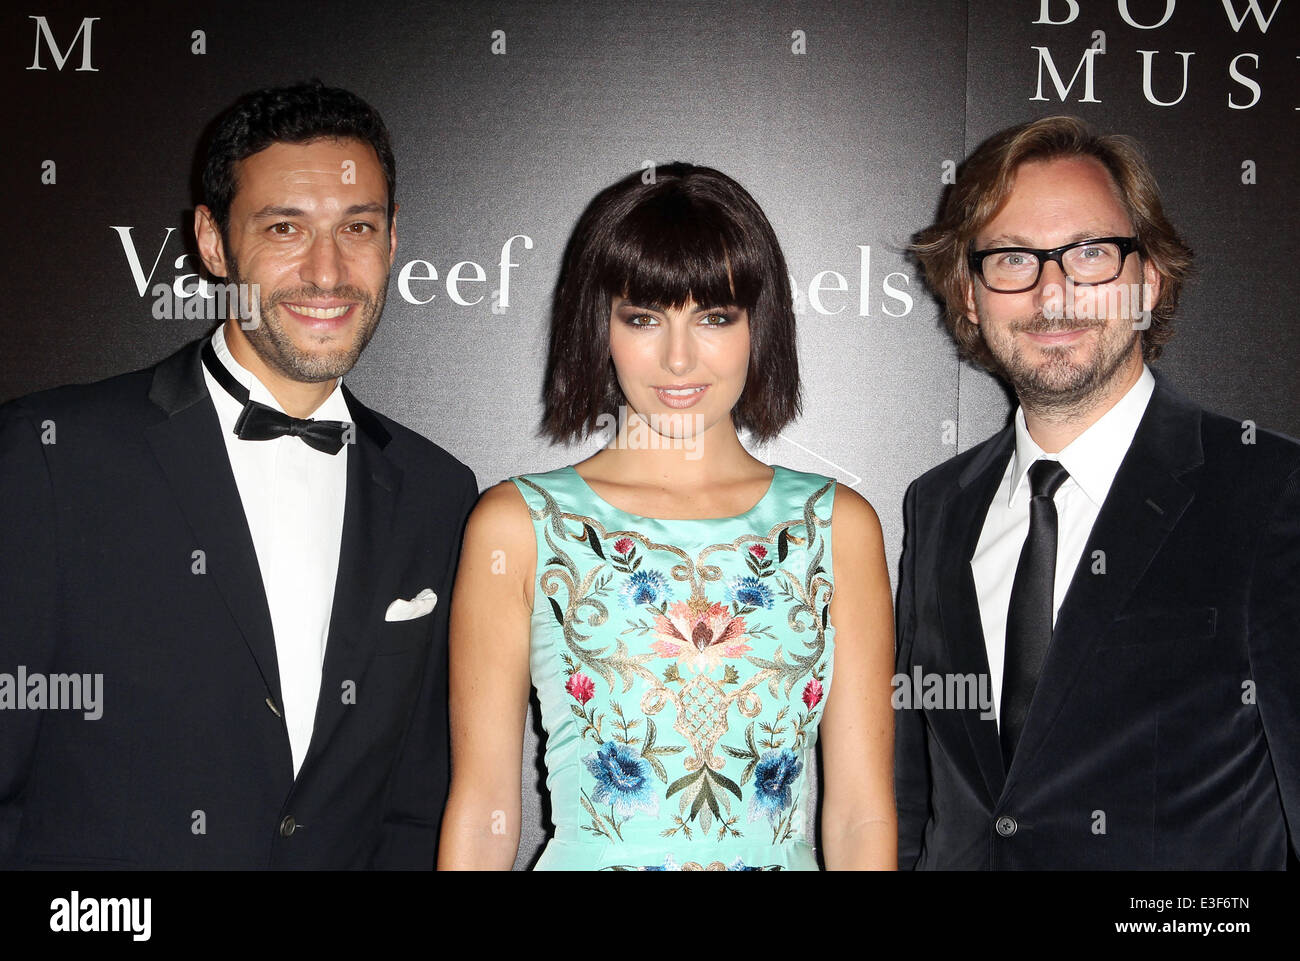 The Van Cleef & Arpels Bowers Museum Exhibit Gala Held at The Bowers ...